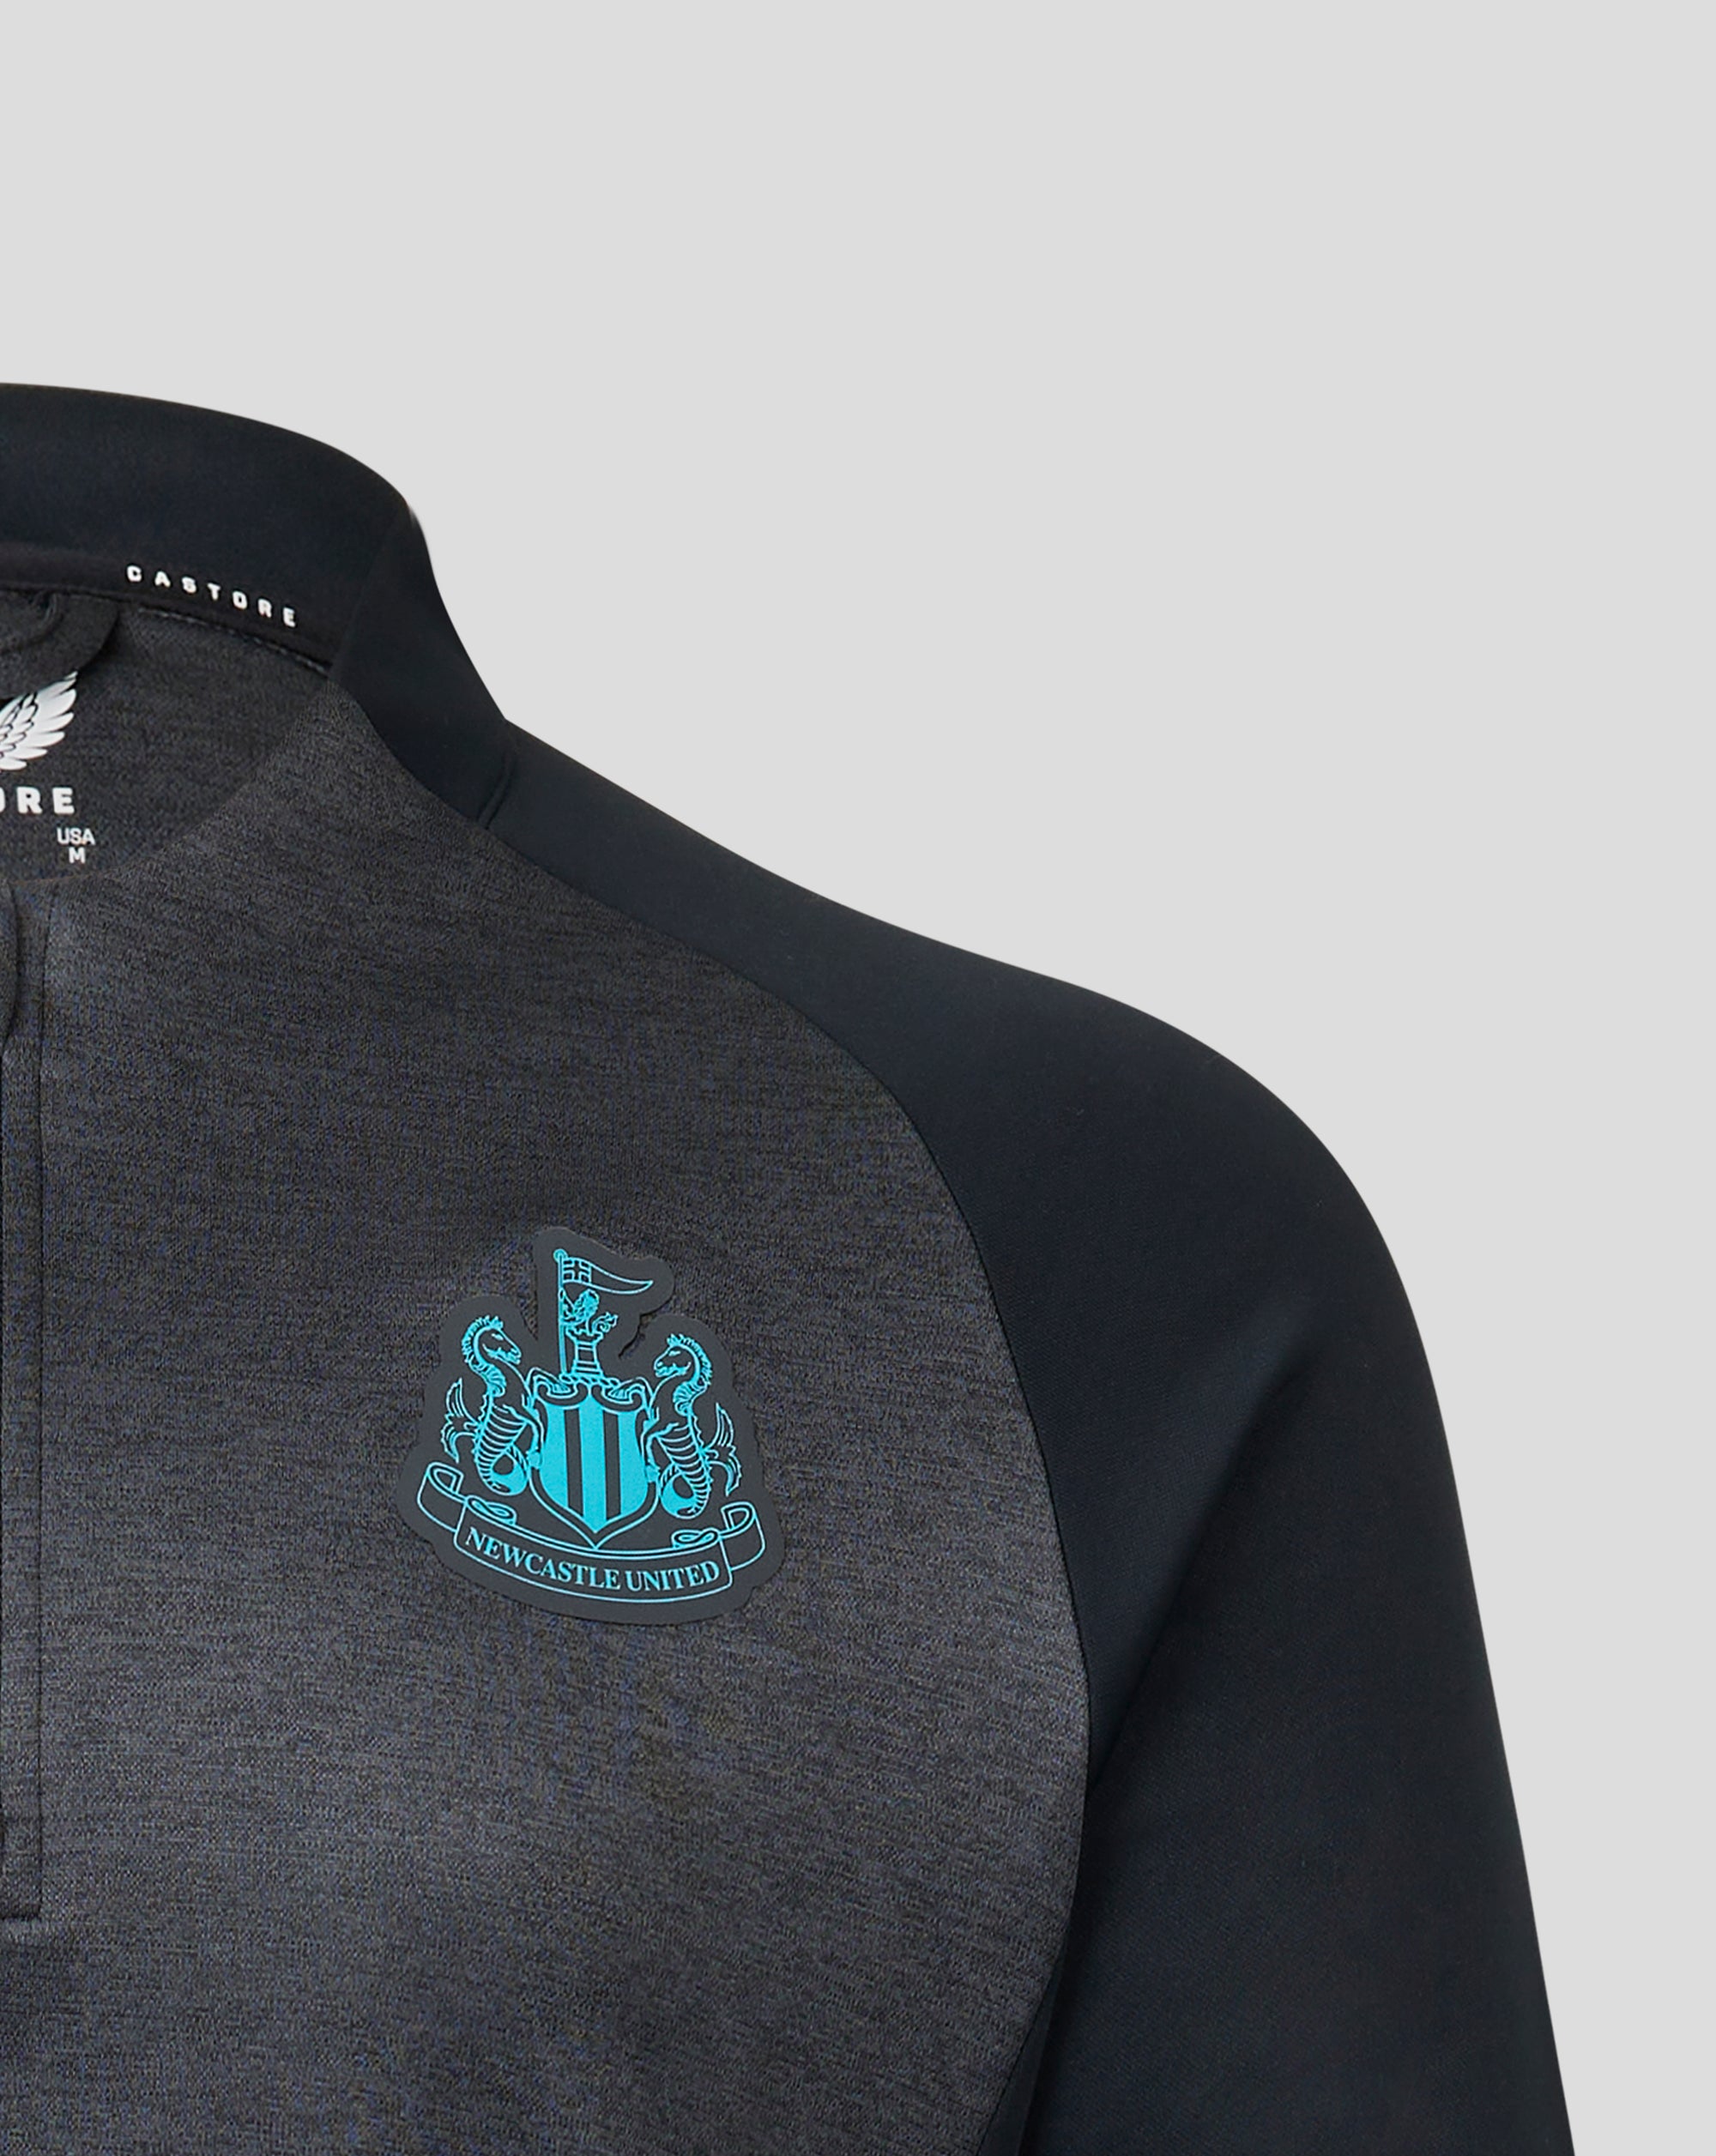 Black and grey Newcastle United 1/4 zip top